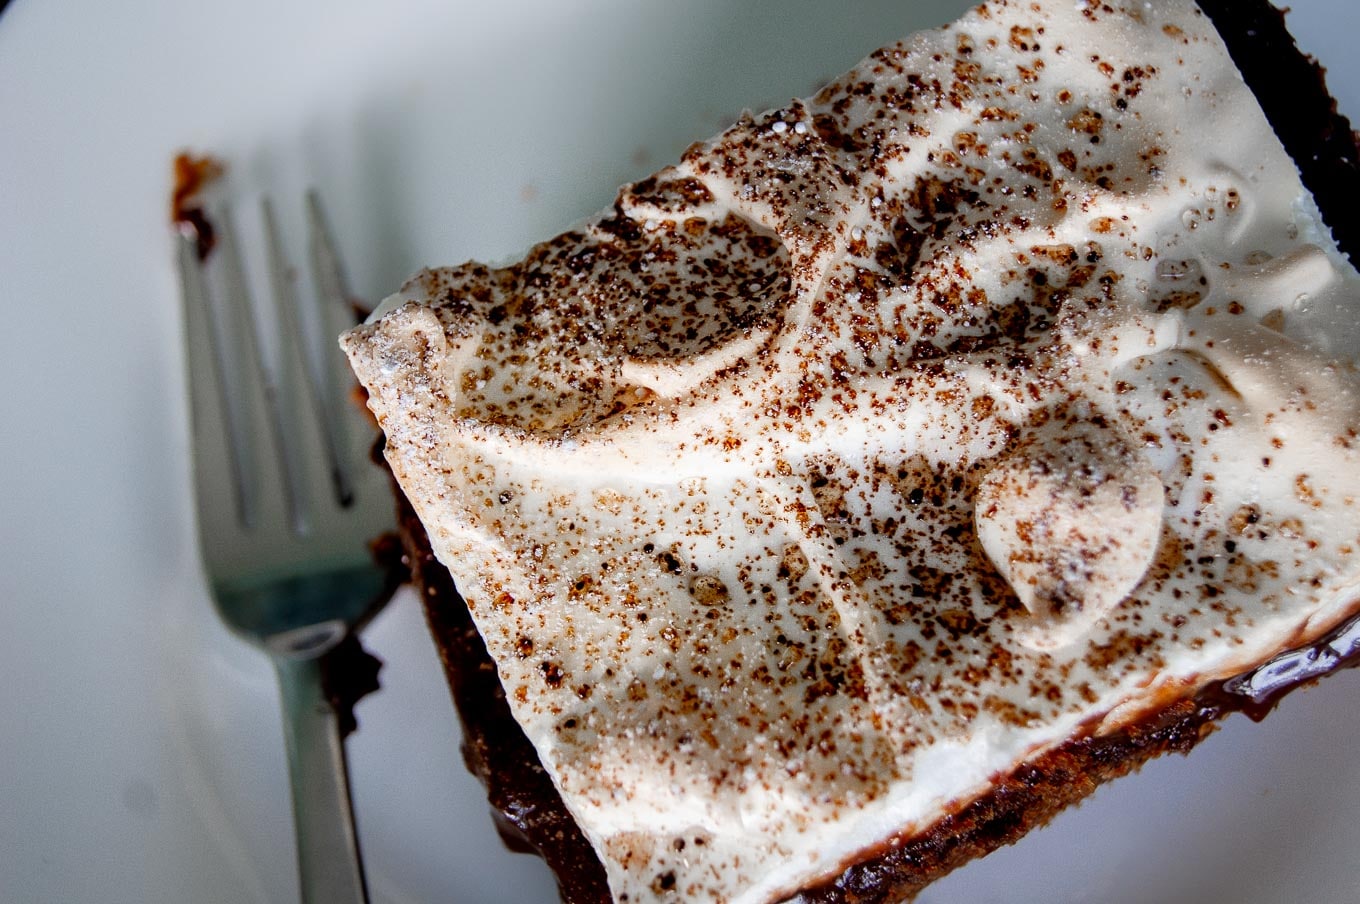 A close-up overhead photo of a slice of gooey chocolate meringue cake, highlighting the deep swirl patterns of the meringue.